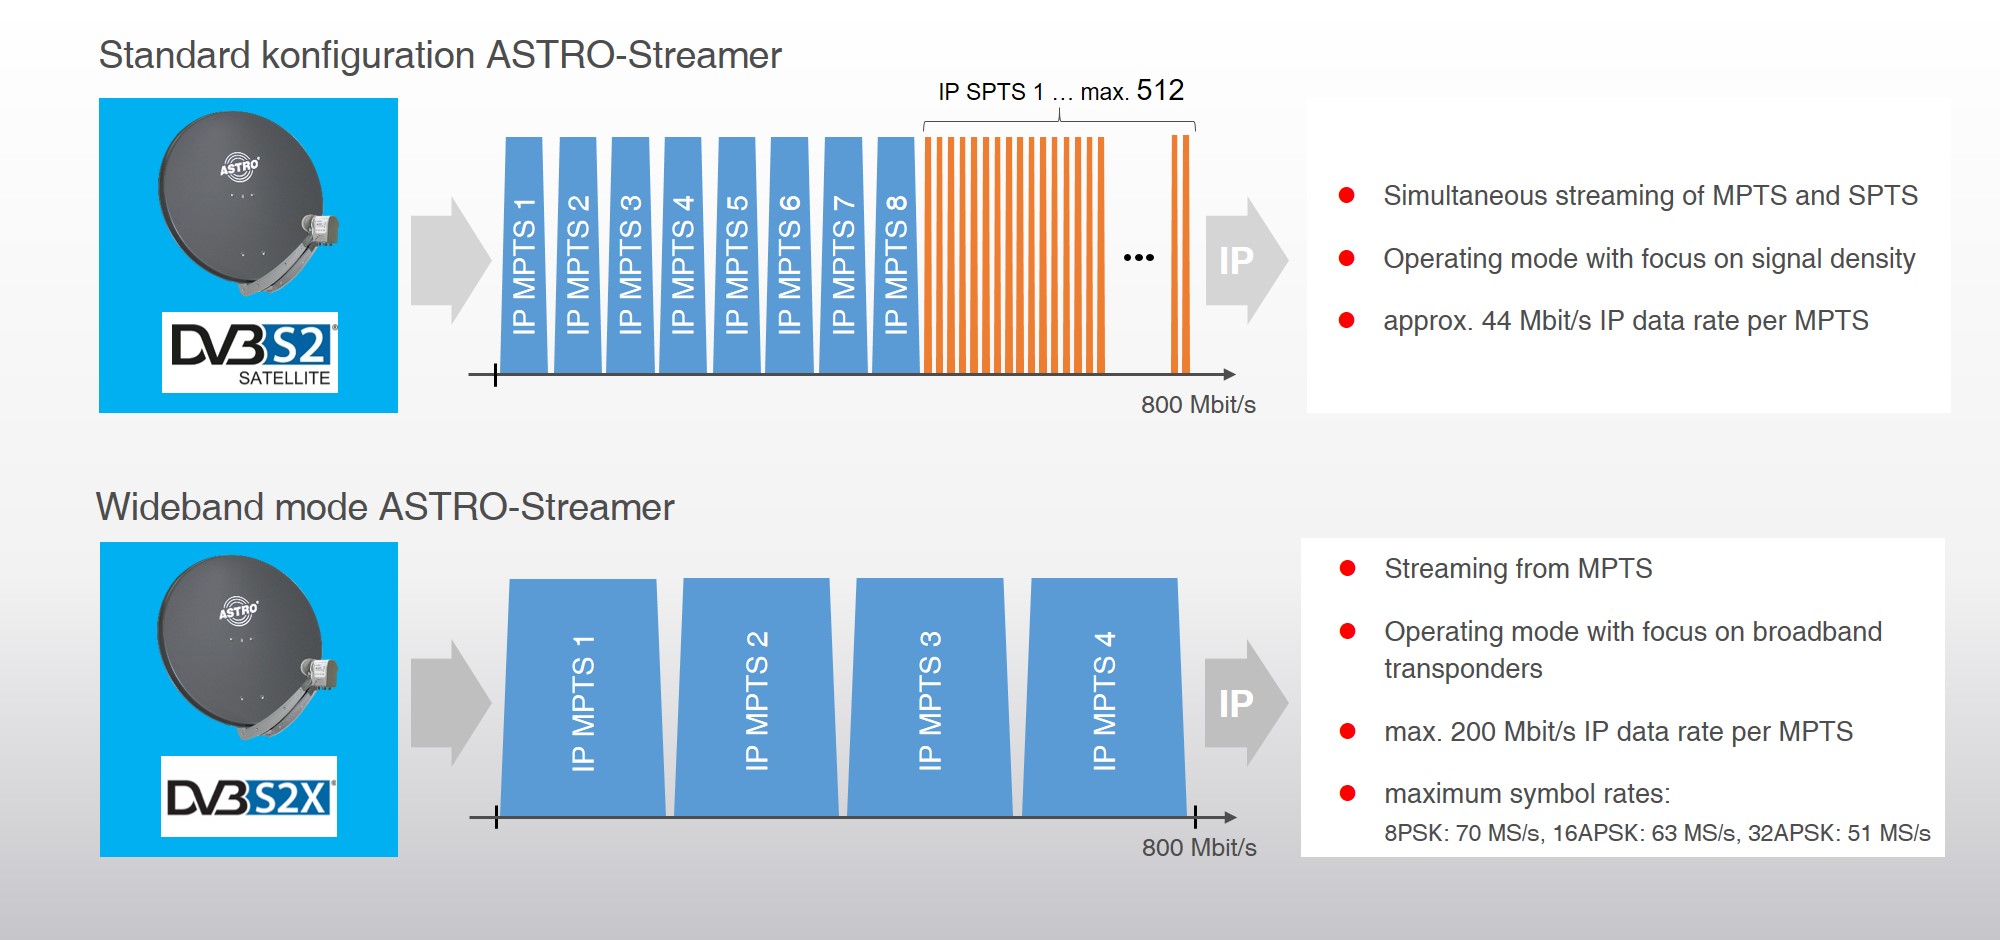 Wideband mode at ASTRO streamer